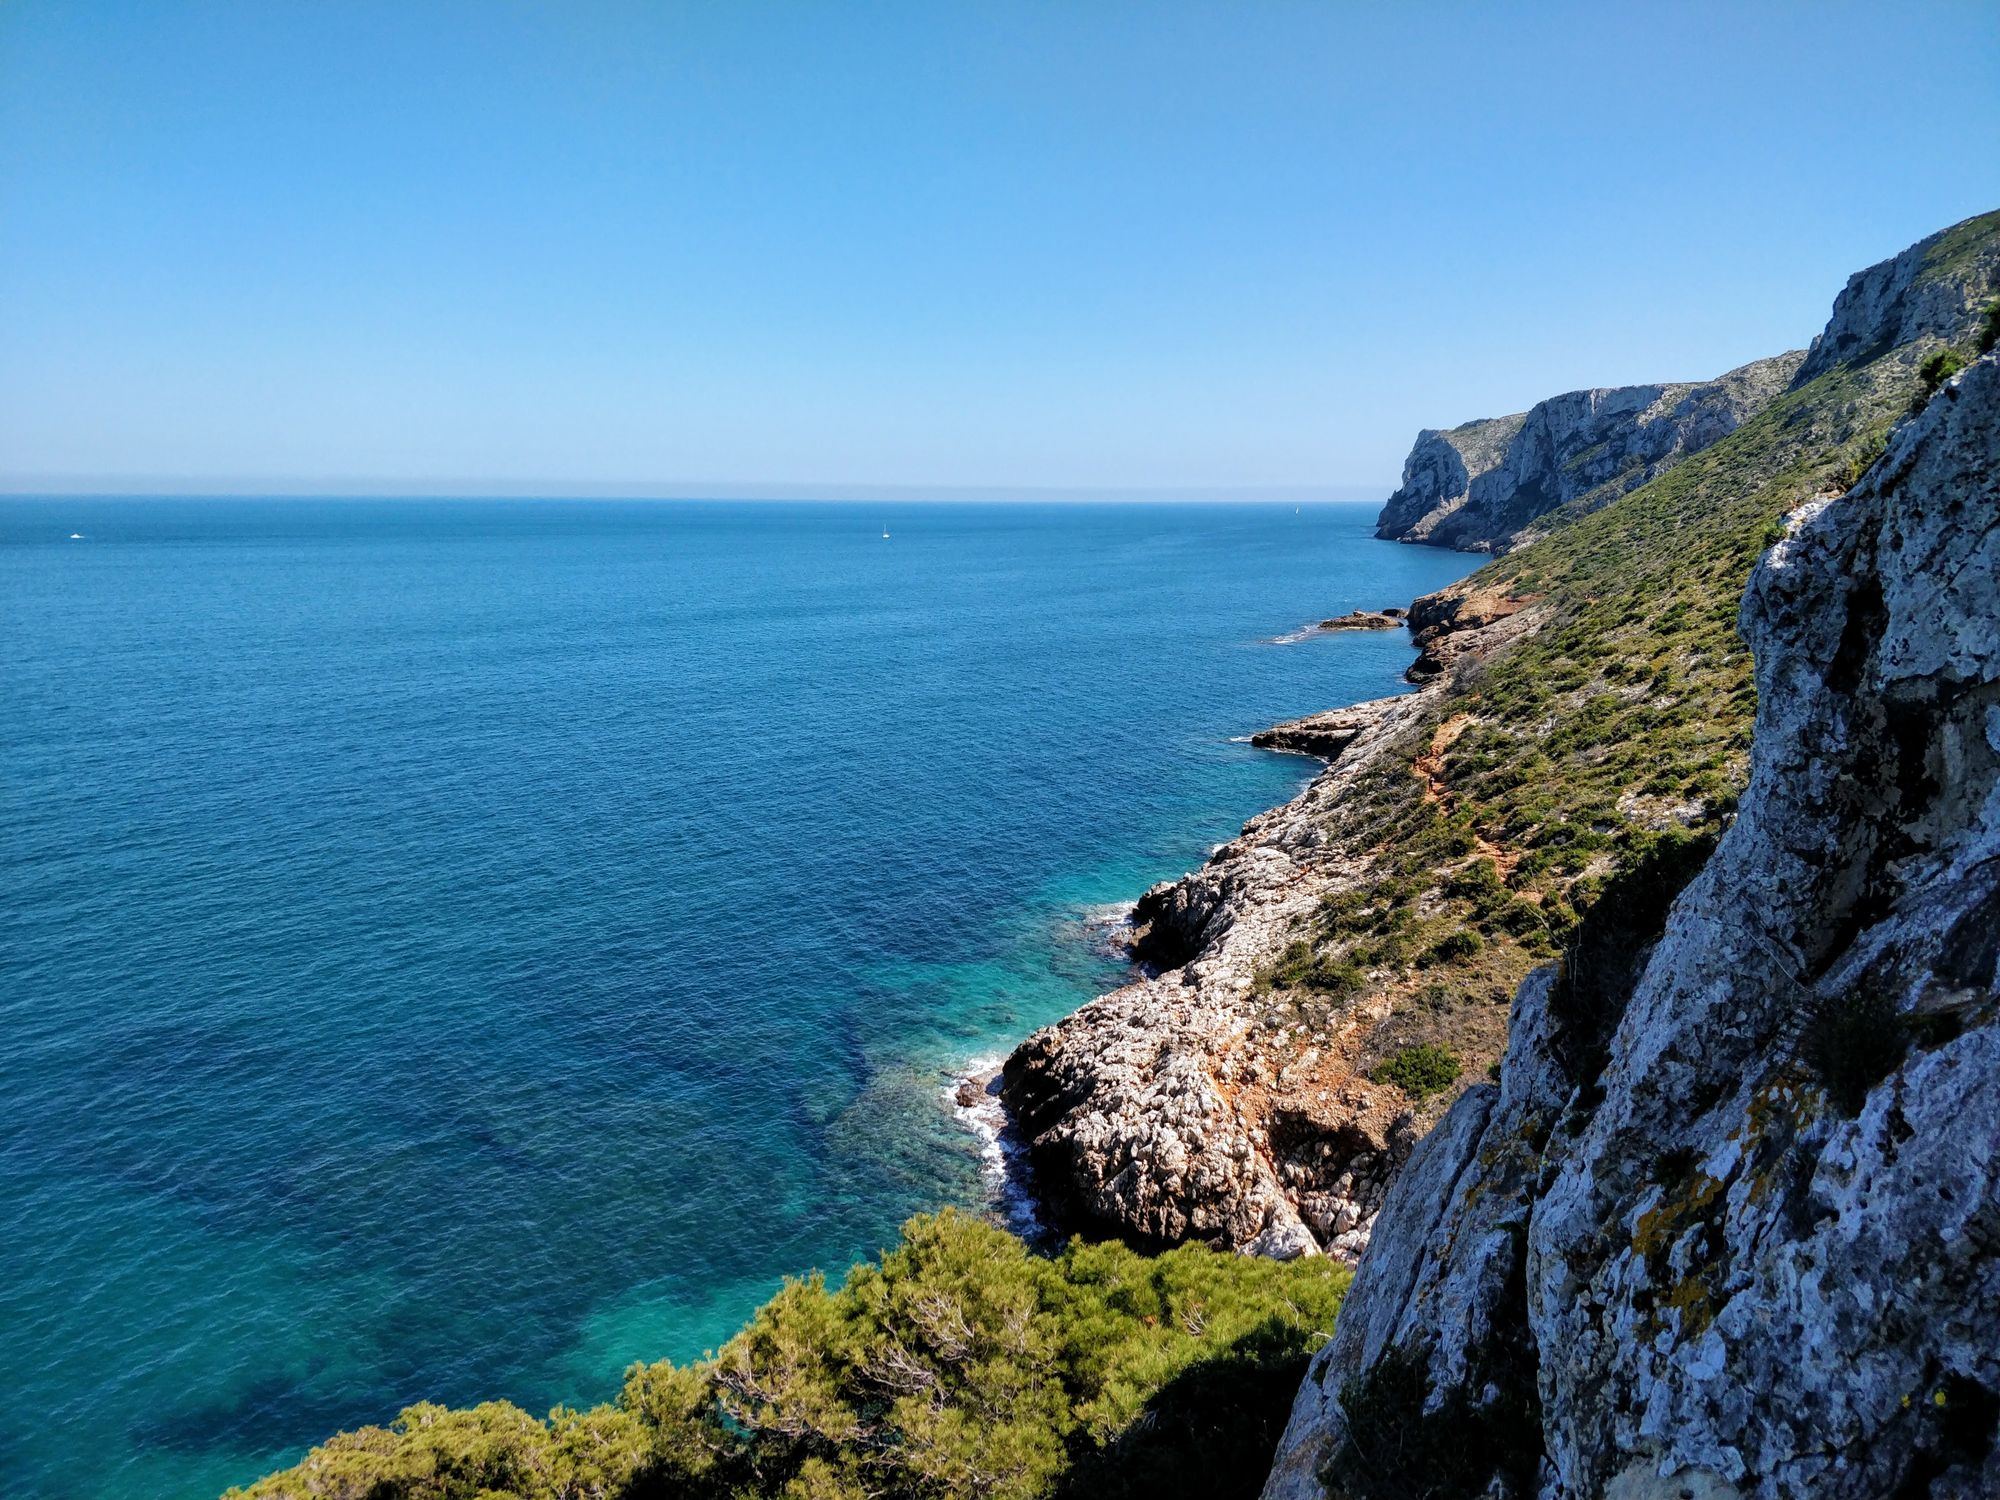 Cova Tallada - The Cave Carved by the Mediterranean Sea and the Spanish People (Apr 2021)